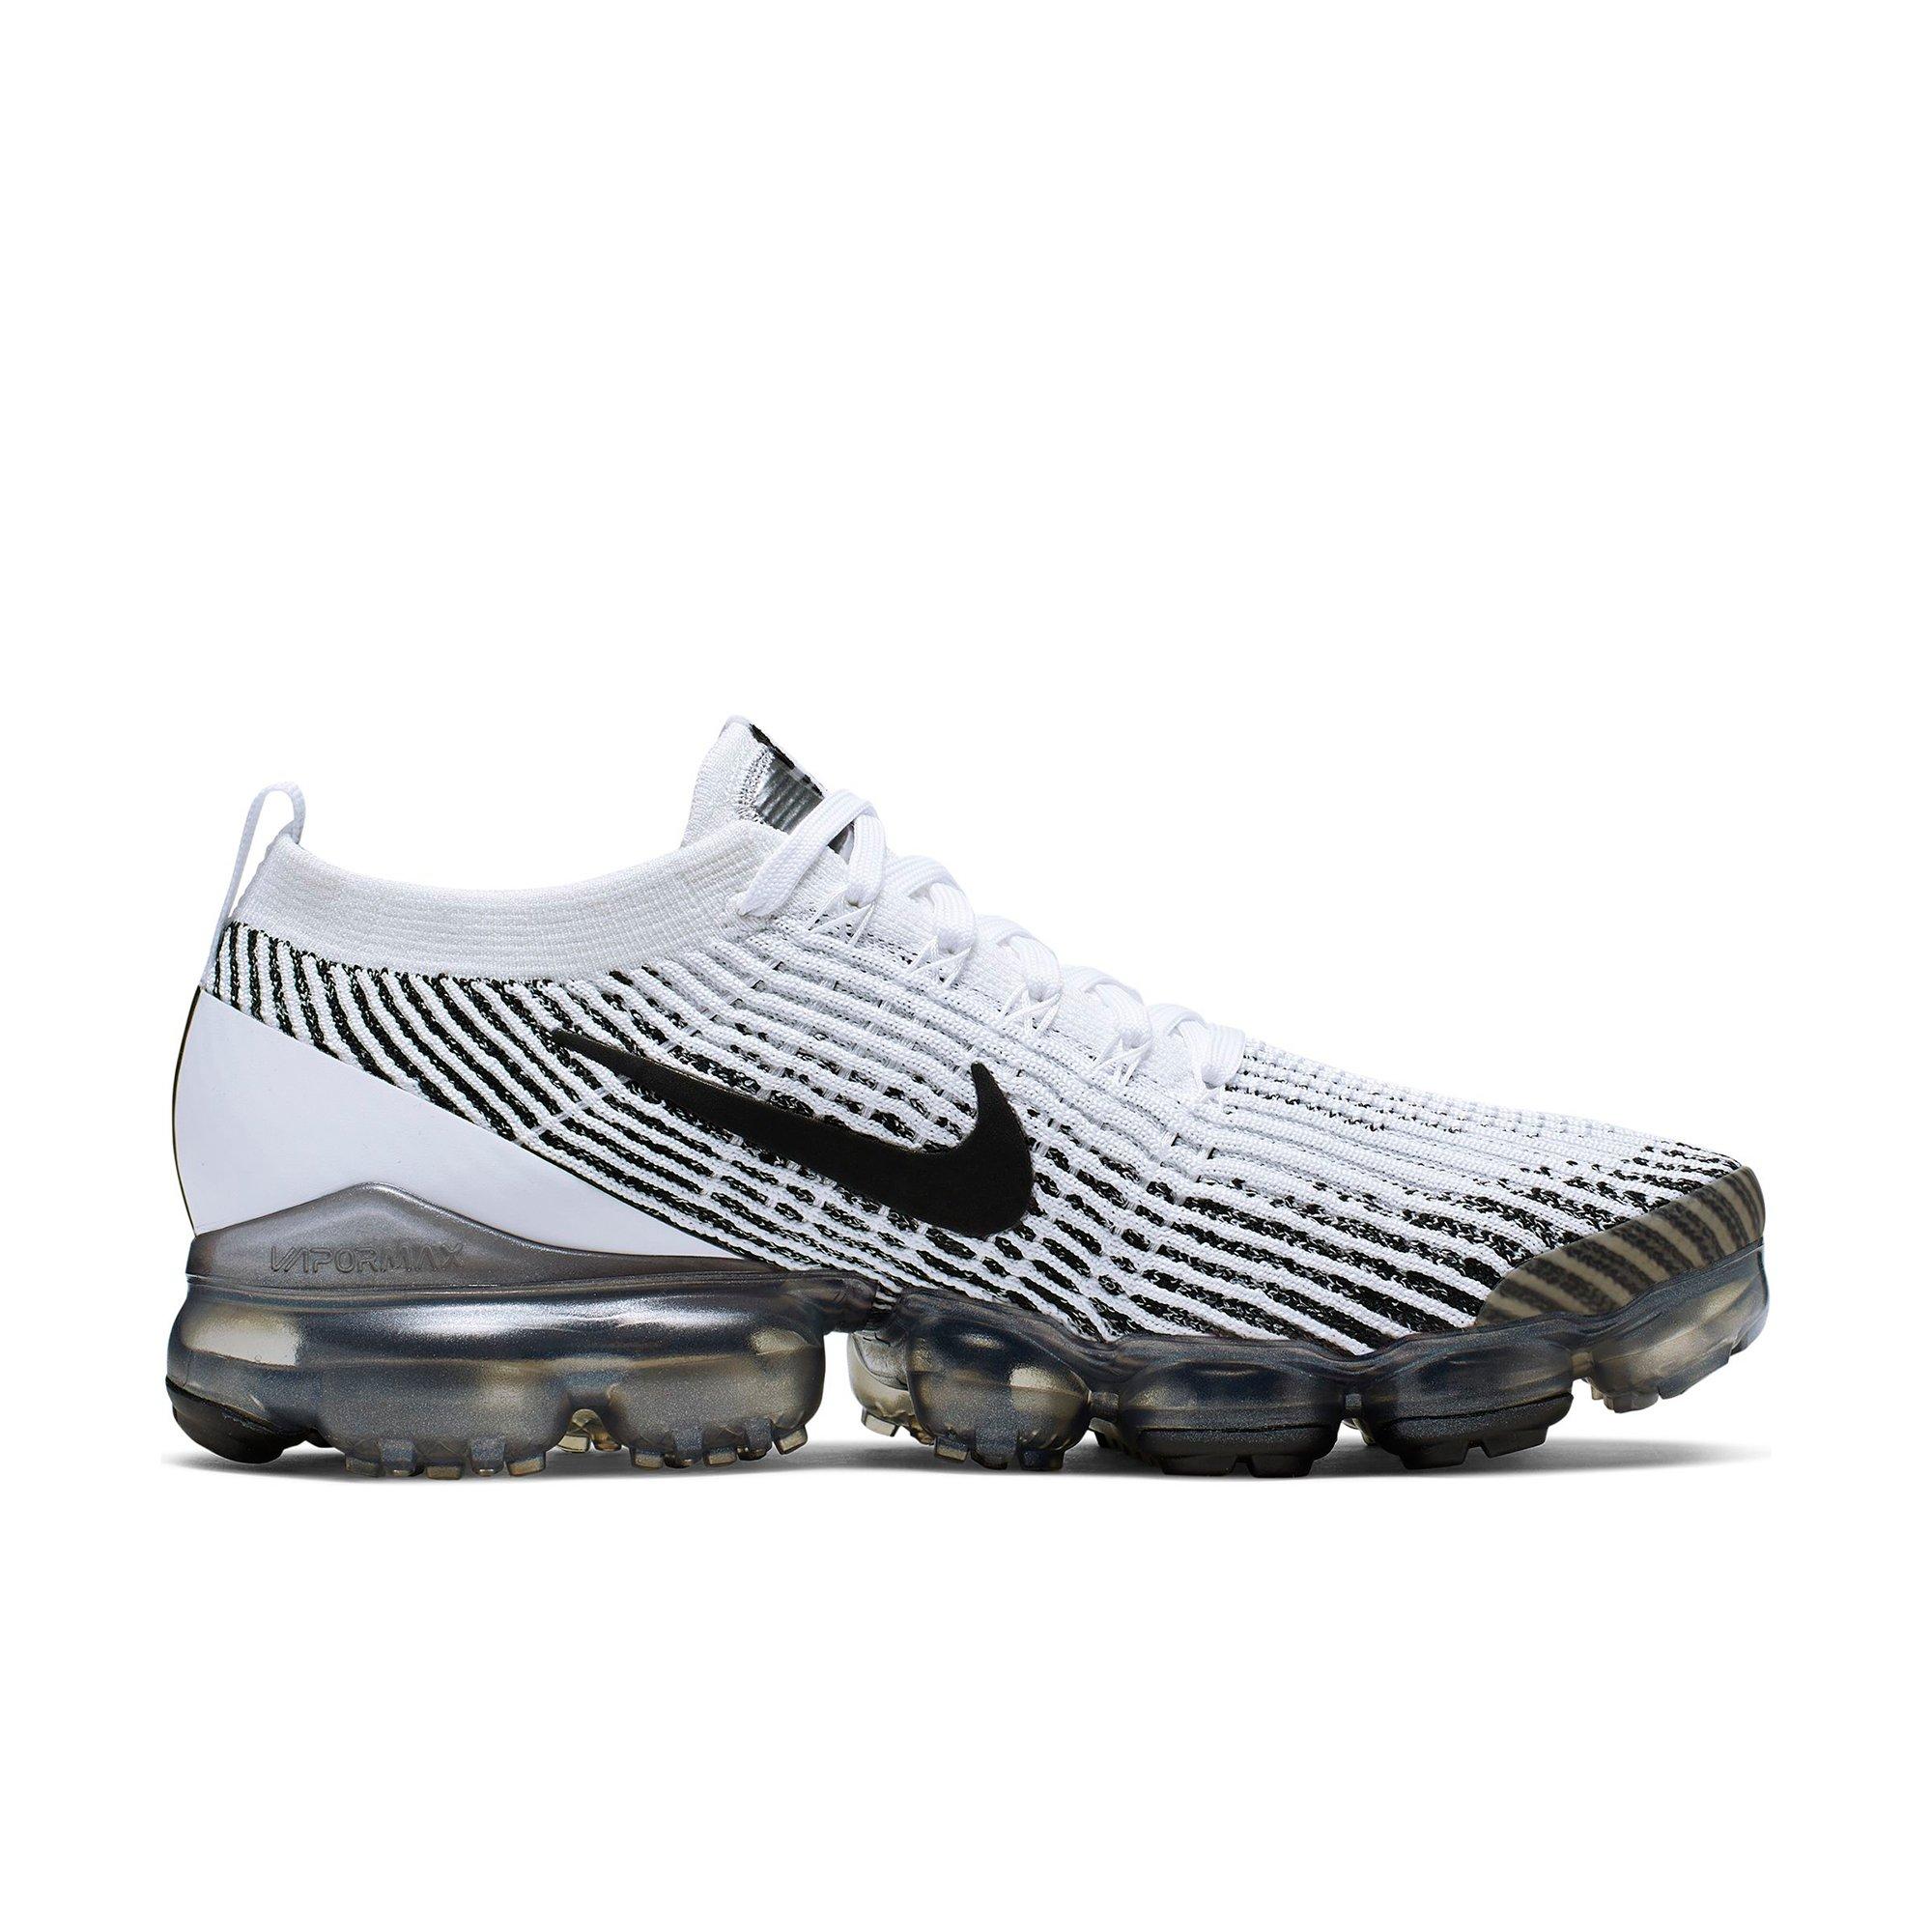 vapormax black and white